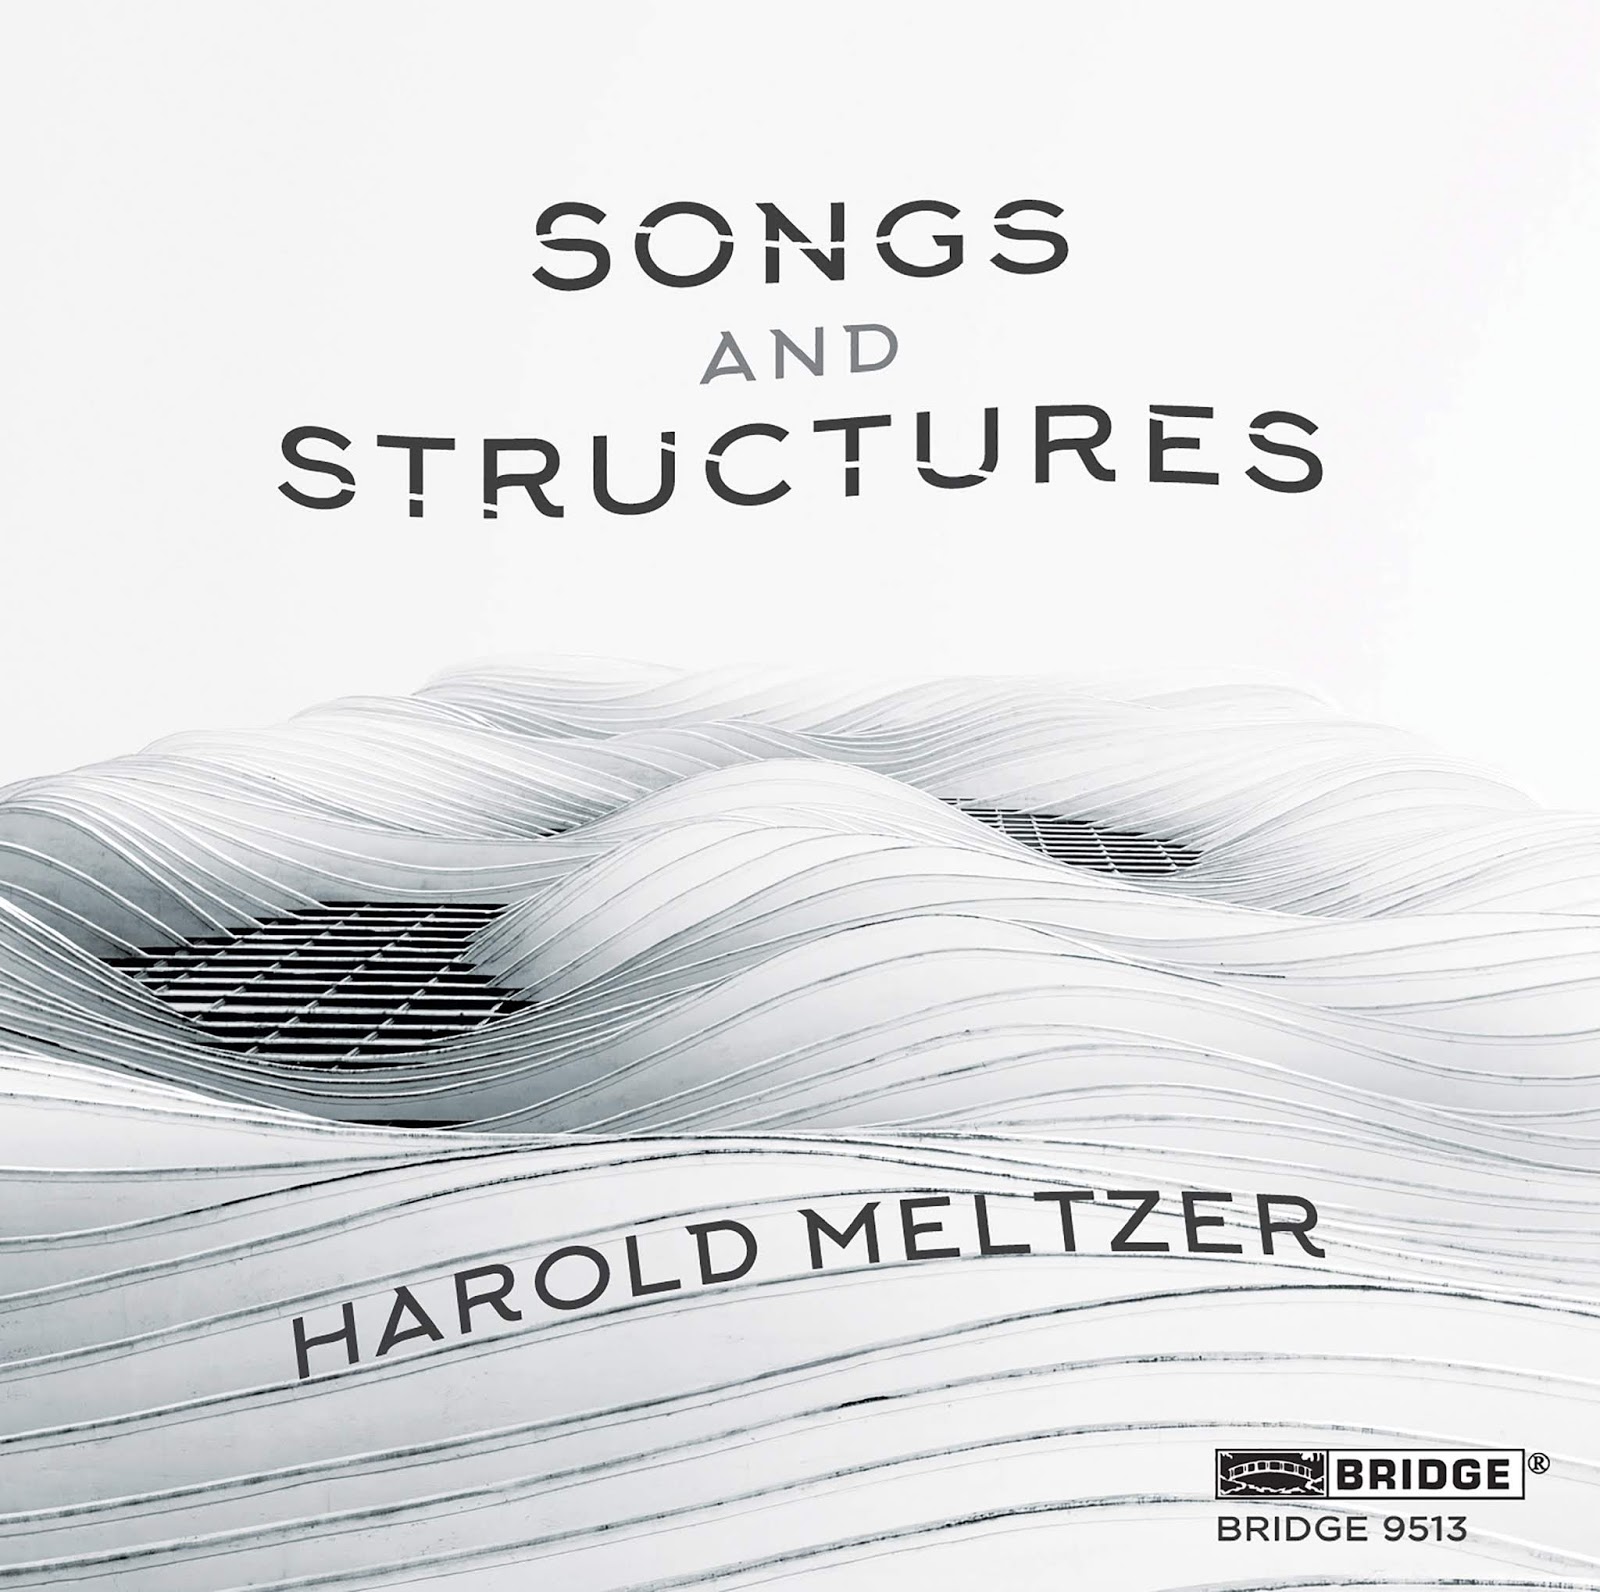 BEST CONTEMPORARY MUSIC RECORDING OF 2018: Harold Meltzer - SONGS AND STRUCTURES (Bridge Records BCD 9513)